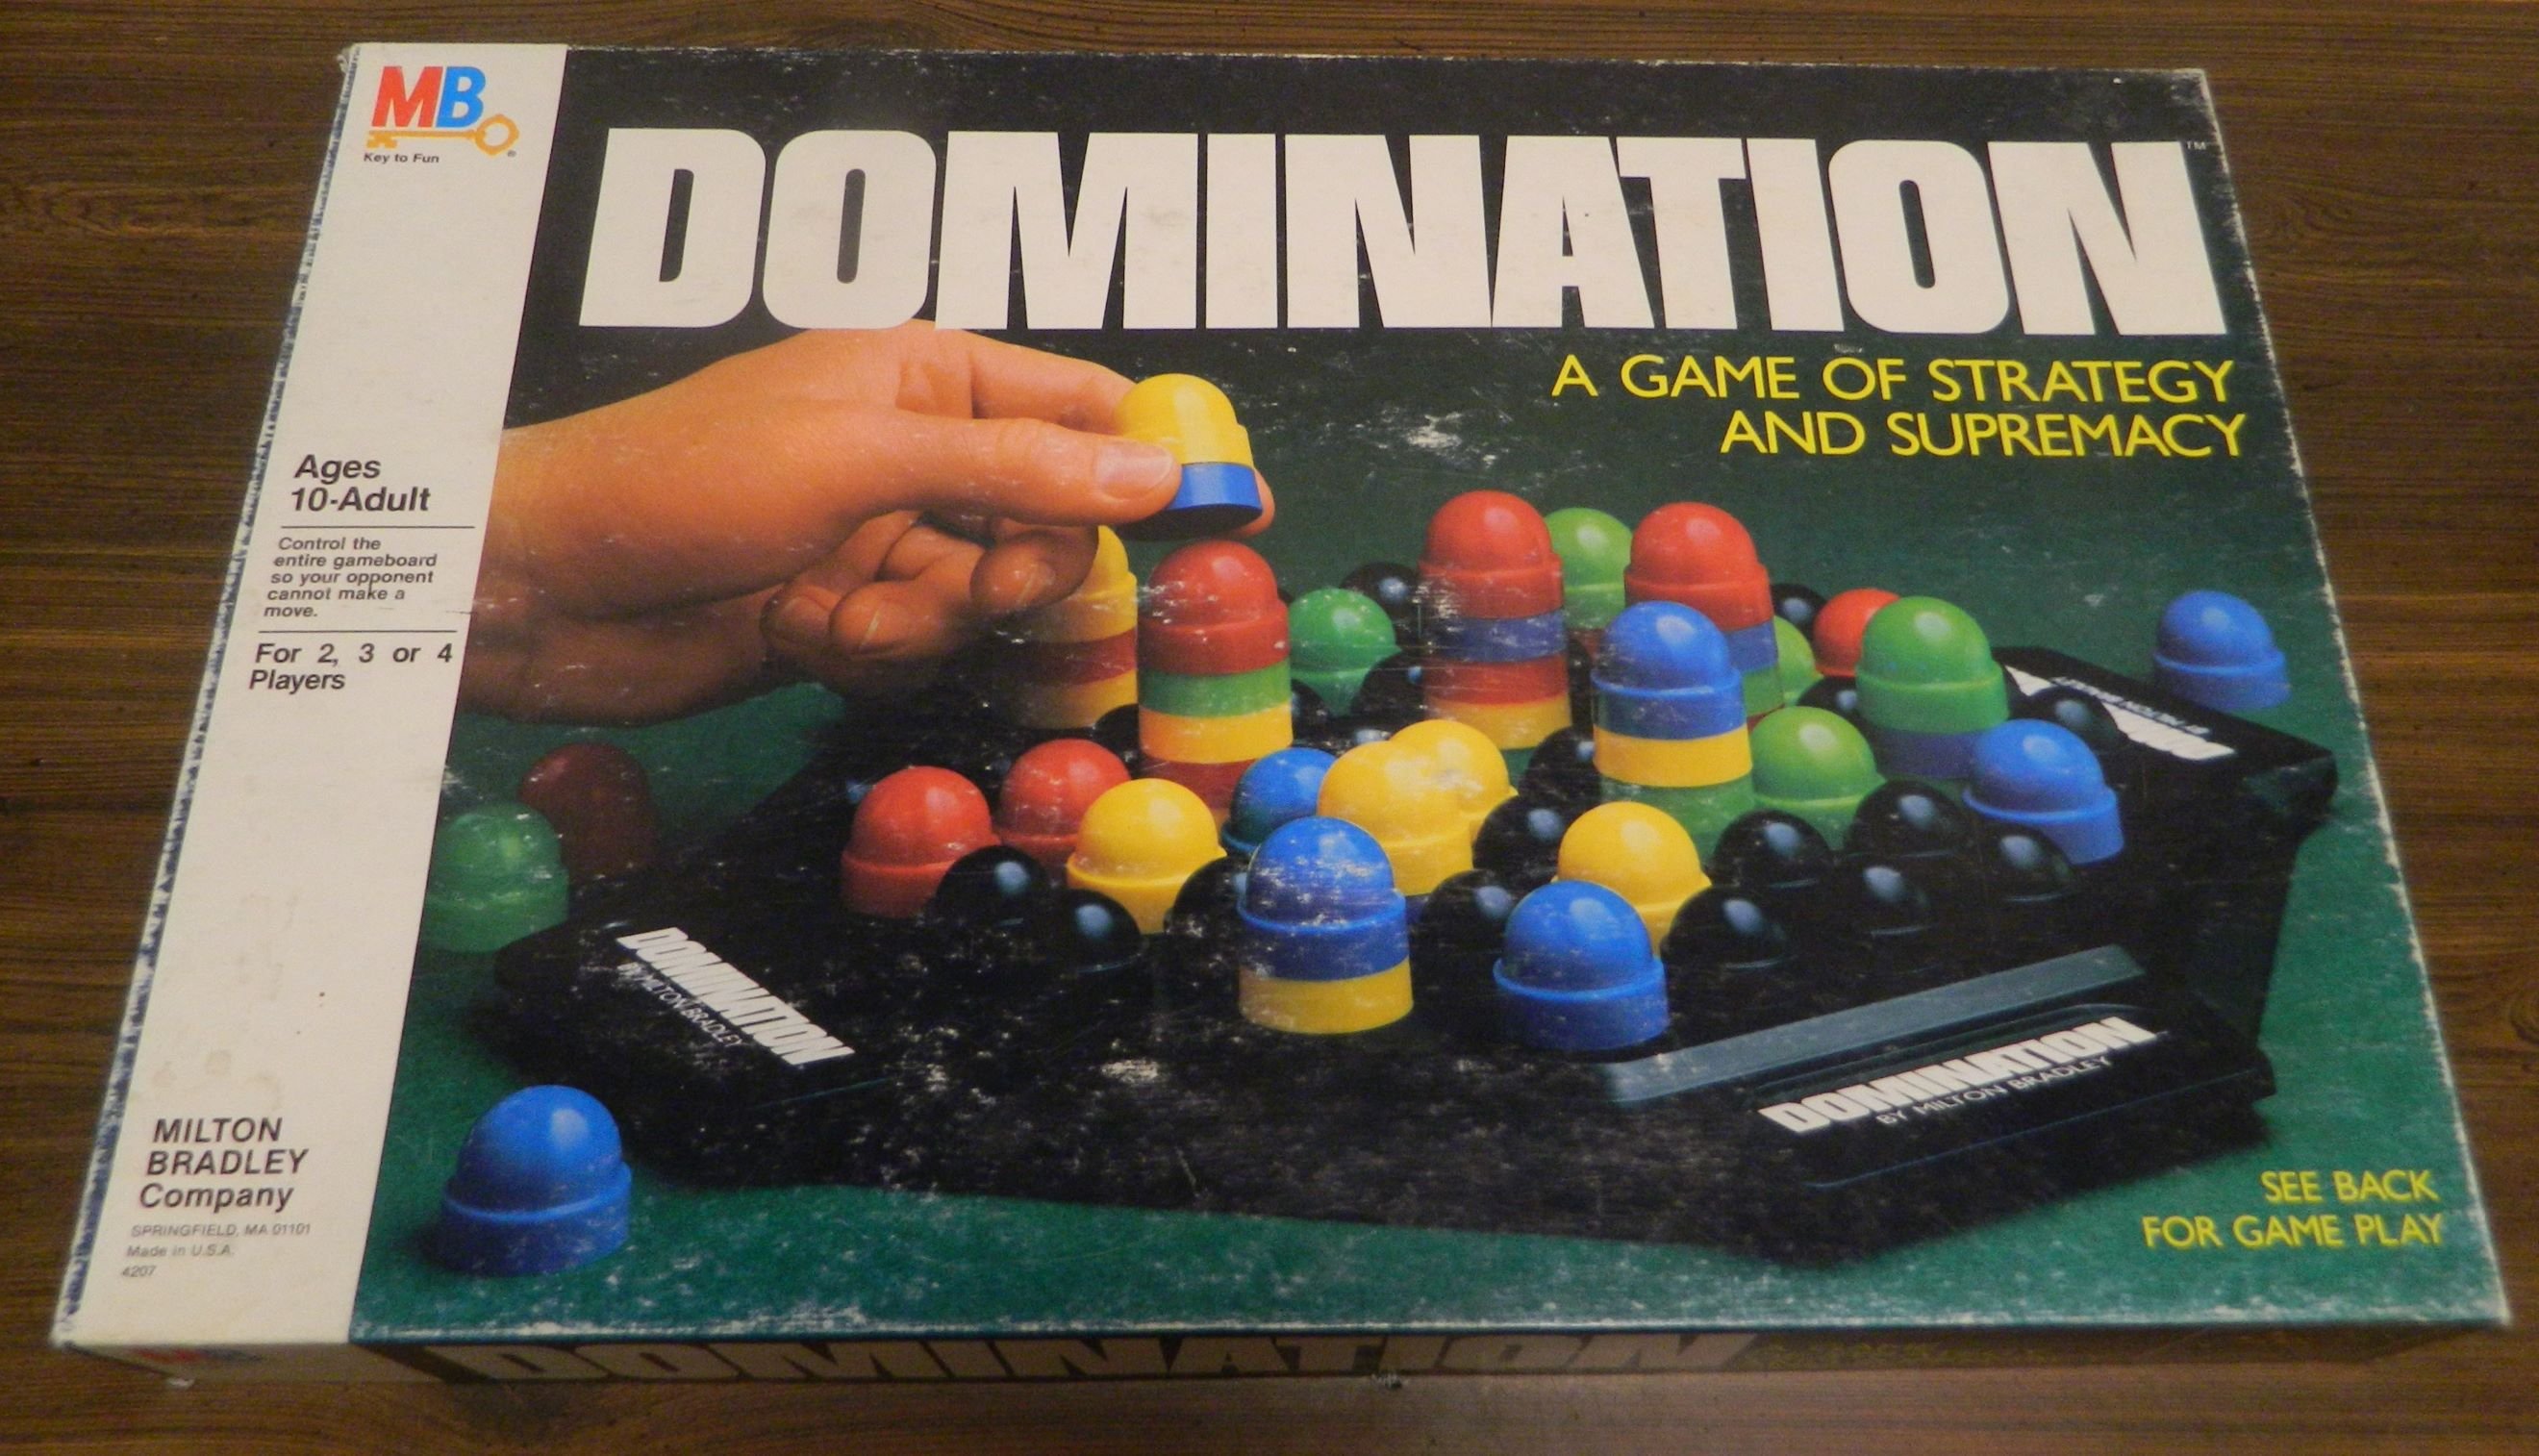 Domination AKA Focus Board Game Review and Rules